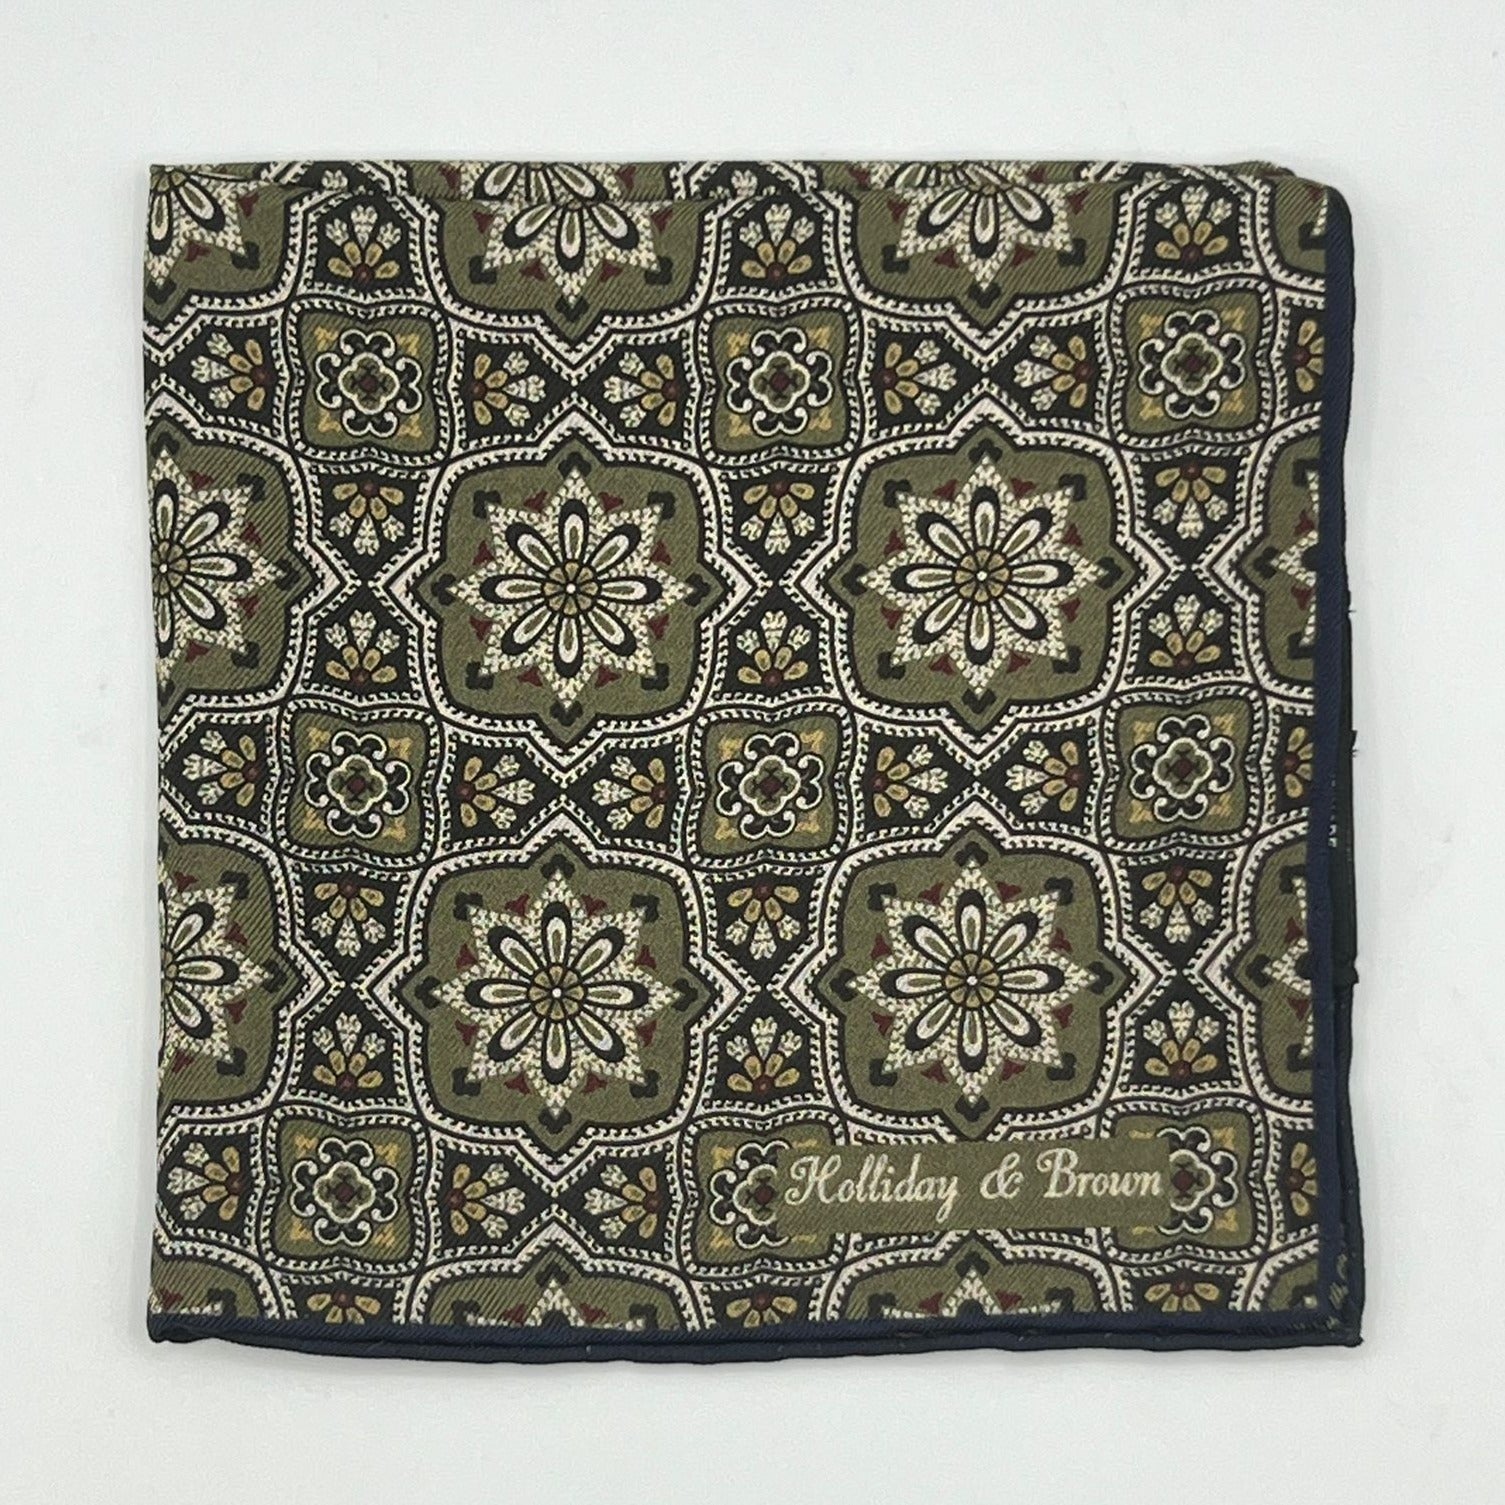 Holliday & Brown - Silk - Olive Green, Blue and Off White Double Patterned Motif Pocket Square #7970